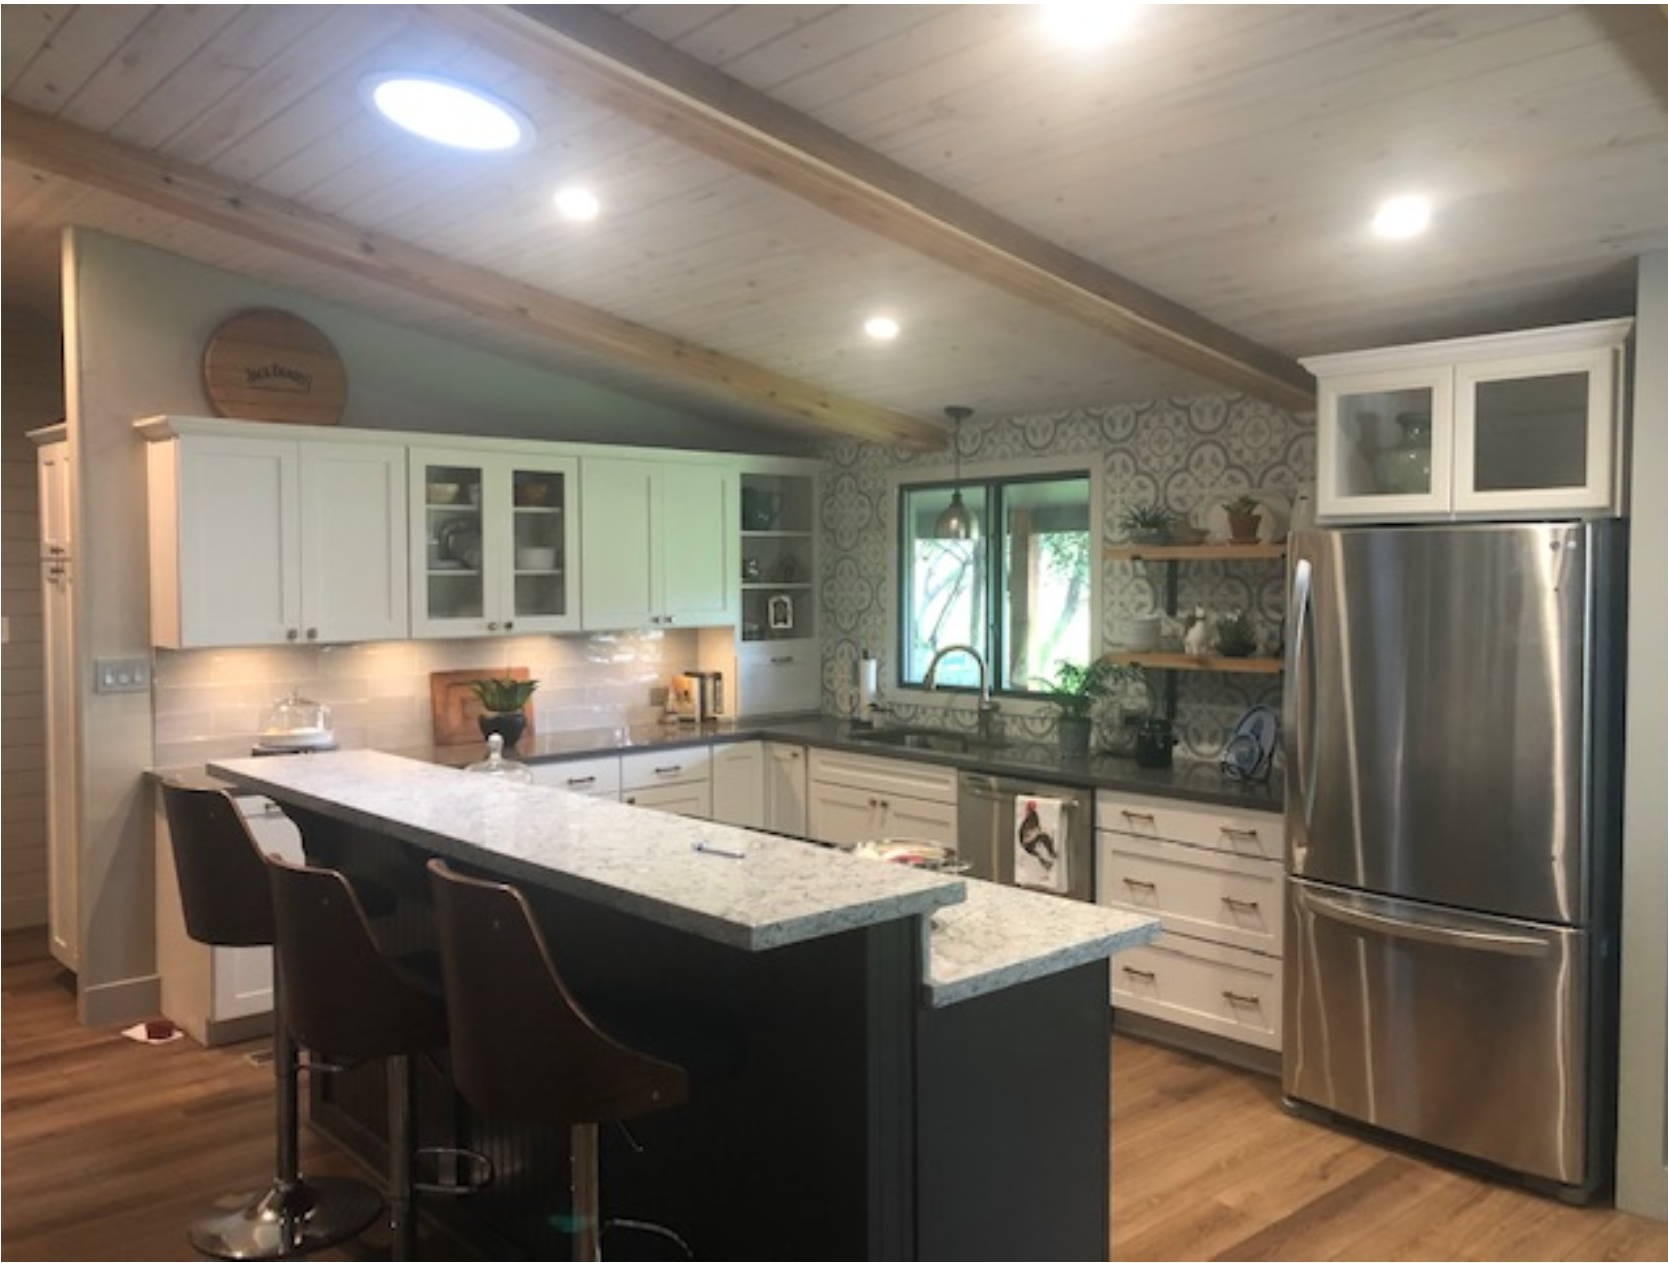 new cabinets, tile, wood ceiling